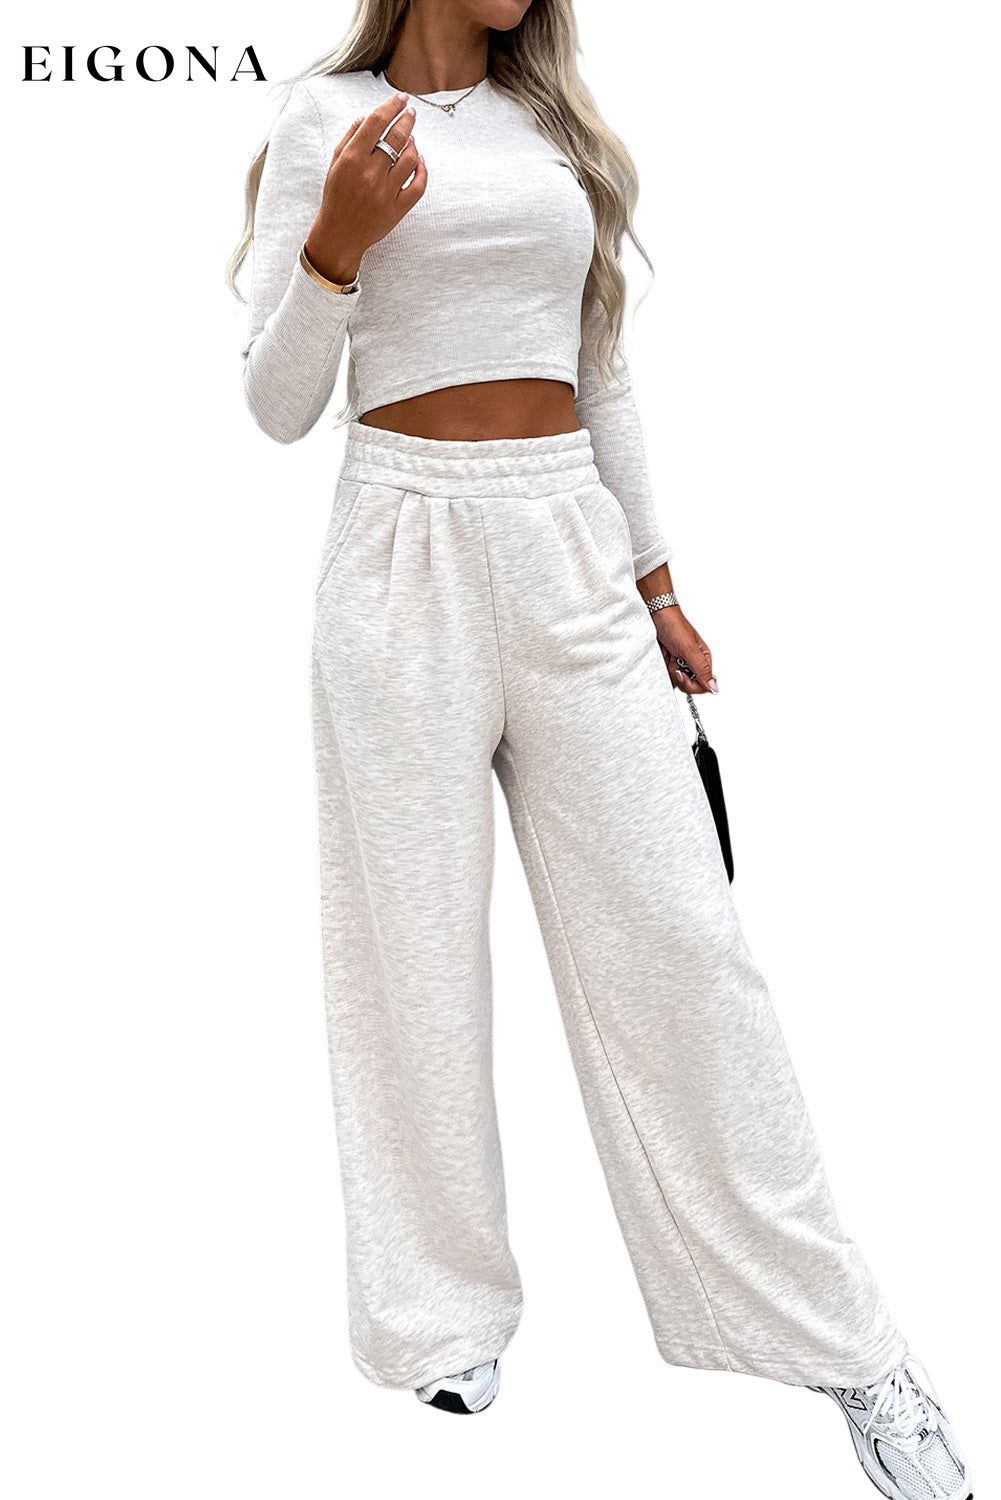 Beige Crop Top and Wide Leg Pants Two Piece Set All In Stock clothes EDM Monthly Recomend Hot picks lounge lounge wear lounge wear sets loungewear loungewear sets Occasion Daily Print Solid Color Season Winter sets Silhouette Wide Leg Style Casual